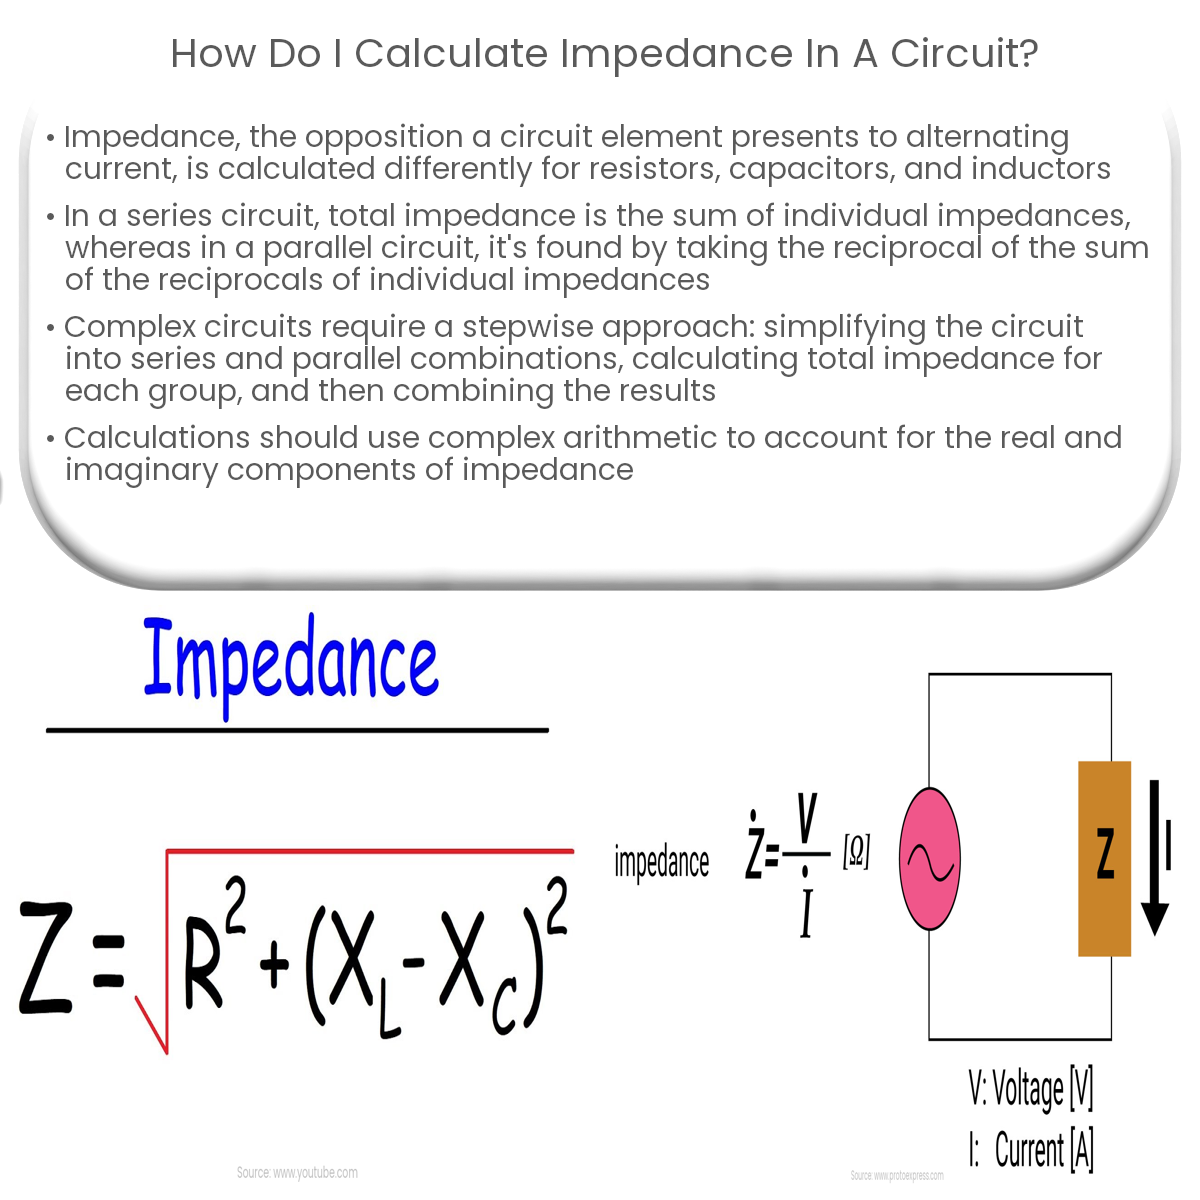 How do I calculate impedance in a circuit?